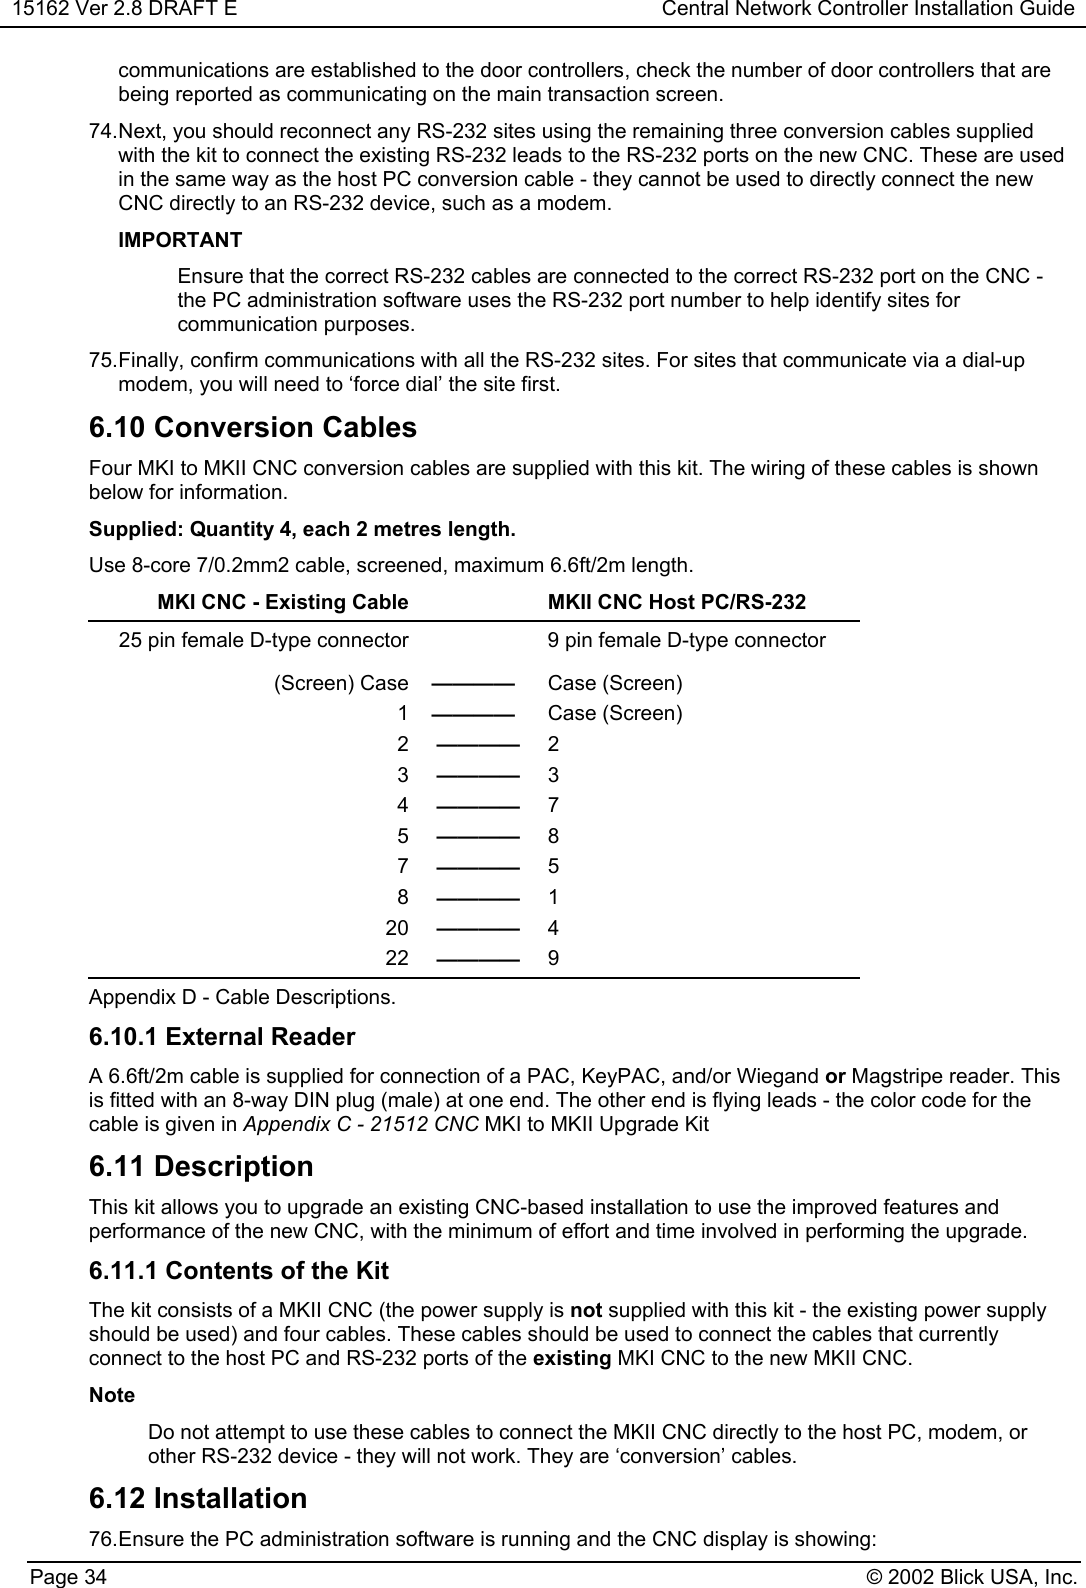 15162 Ver 2.8 DRAFT E Central Network Controller Installation GuidePage 34 © 2002 Blick USA, Inc.communications are established to the door controllers, check the number of door controllers that arebeing reported as communicating on the main transaction screen.74. Next, you should reconnect any RS-232 sites using the remaining three conversion cables suppliedwith the kit to connect the existing RS-232 leads to the RS-232 ports on the new CNC. These are usedin the same way as the host PC conversion cable - they cannot be used to directly connect the newCNC directly to an RS-232 device, such as a modem.IMPORTANTEnsure that the correct RS-232 cables are connected to the correct RS-232 port on the CNC -the PC administration software uses the RS-232 port number to help identify sites forcommunication purposes.75. Finally, confirm communications with all the RS-232 sites. For sites that communicate via a dial-upmodem, you will need to ‘force dial’ the site first.6.10 Conversion CablesFour MKI to MKII CNC conversion cables are supplied with this kit. The wiring of these cables is shownbelow for information.Supplied: Quantity 4, each 2 metres length.Use 8-core 7/0.2mm2 cable, screened, maximum 6.6ft/2m length.MKI CNC - Existing Cable MKII CNC Host PC/RS-23225 pin female D-type connector 9 pin female D-type connector(Screen) Case ———— Case (Screen)1———— Case (Screen)2———— 23———— 34———— 75———— 87———— 58———— 120 ———— 422 ———— 9Appendix D - Cable Descriptions.6.10.1 External ReaderA 6.6ft/2m cable is supplied for connection of a PAC, KeyPAC, and/or Wiegand or Magstripe reader. Thisis fitted with an 8-way DIN plug (male) at one end. The other end is flying leads - the color code for thecable is given in Appendix C - 21512 CNC MKI to MKII Upgrade Kit6.11 DescriptionThis kit allows you to upgrade an existing CNC-based installation to use the improved features andperformance of the new CNC, with the minimum of effort and time involved in performing the upgrade.6.11.1 Contents of the KitThe kit consists of a MKII CNC (the power supply is not supplied with this kit - the existing power supplyshould be used) and four cables. These cables should be used to connect the cables that currentlyconnect to the host PC and RS-232 ports of the existing MKI CNC to the new MKII CNC.NoteDo not attempt to use these cables to connect the MKII CNC directly to the host PC, modem, orother RS-232 device - they will not work. They are ‘conversion’ cables.6.12 Installation76. Ensure the PC administration software is running and the CNC display is showing: